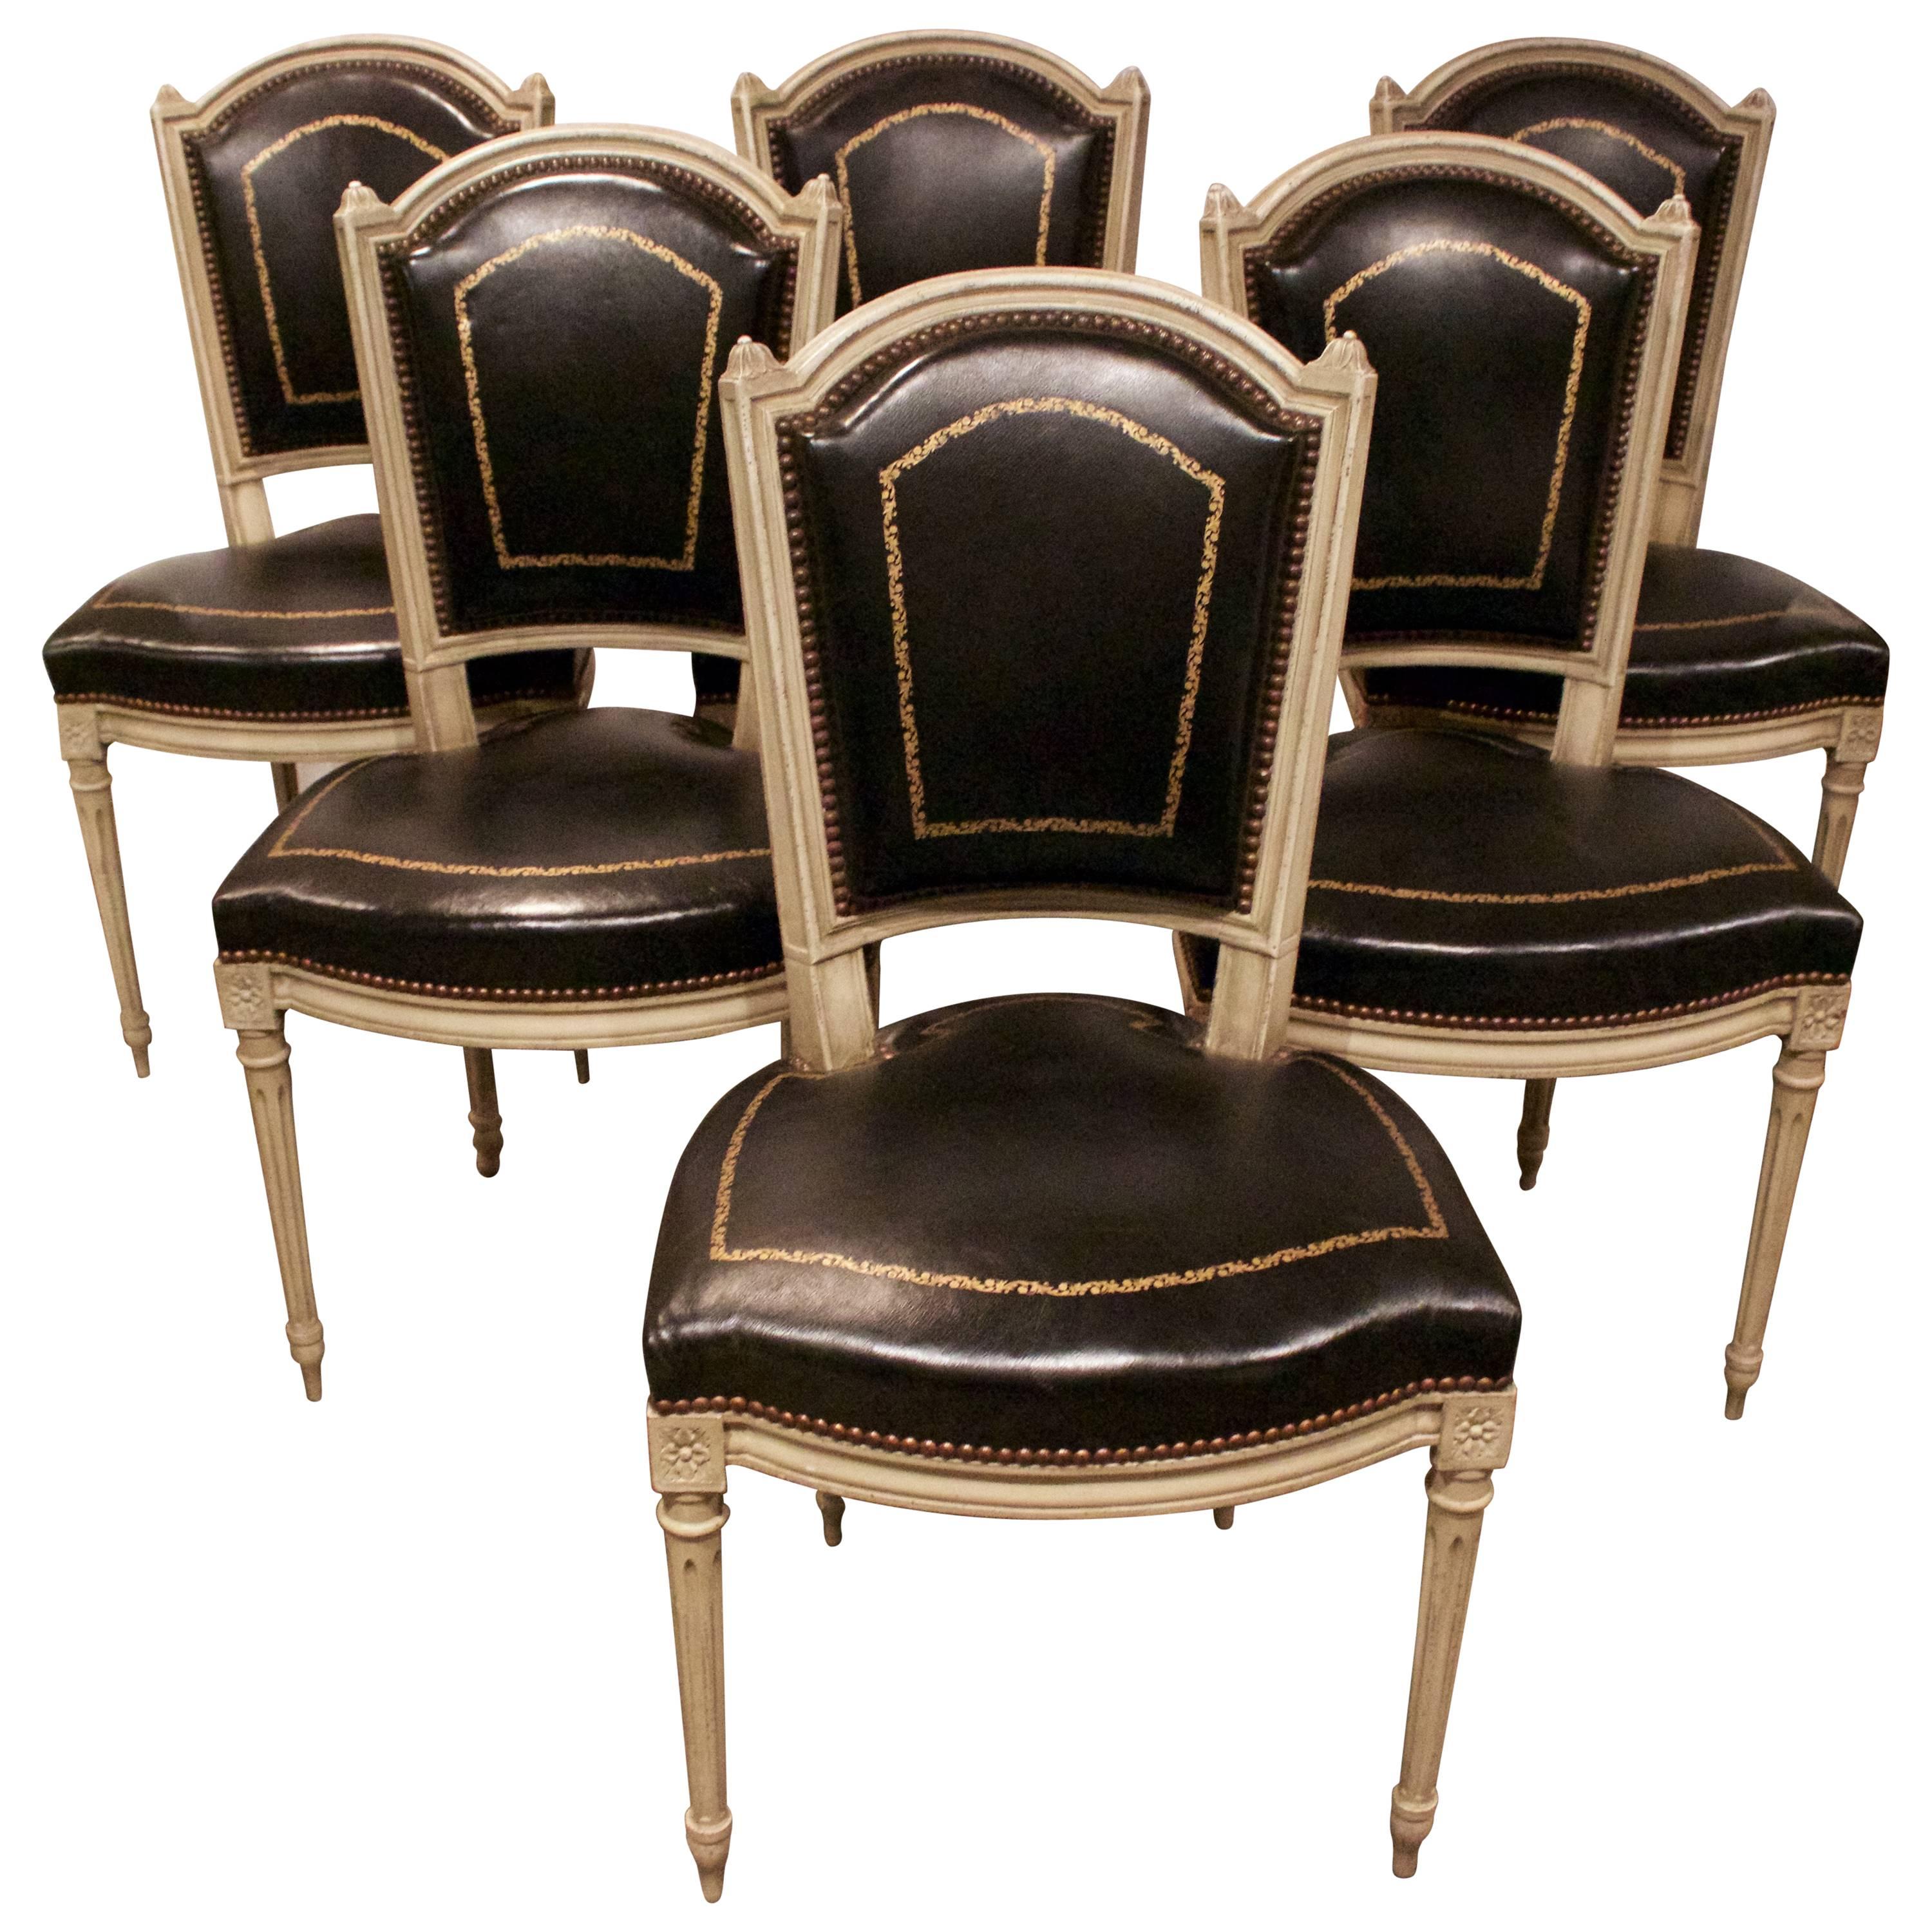 Set of Six French Louis XVI Style Chairs